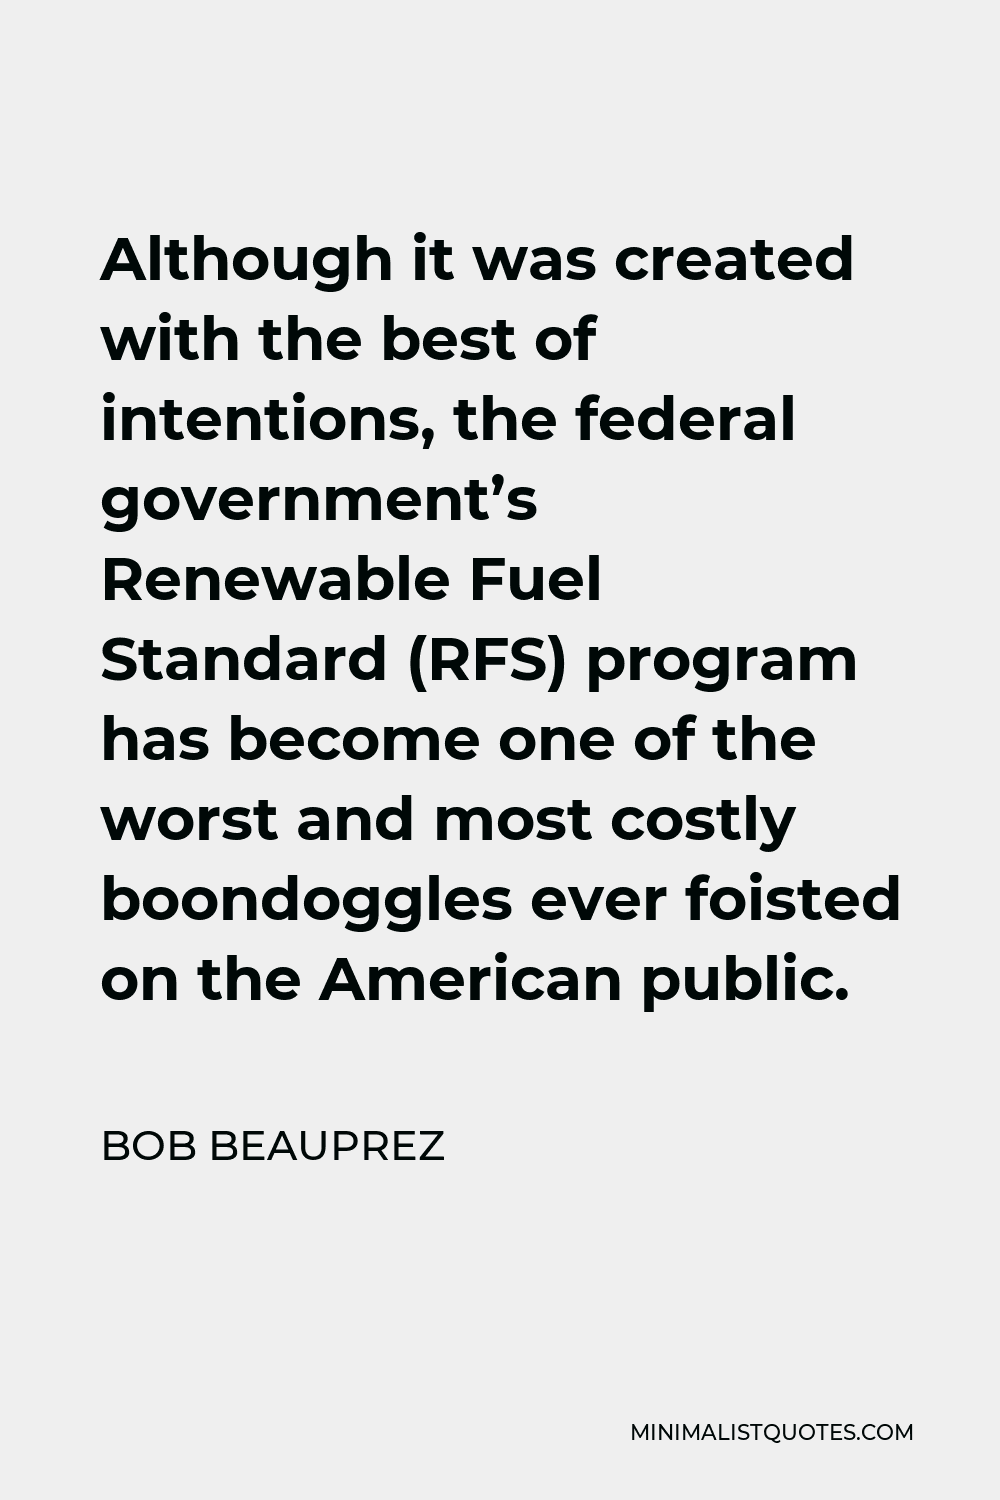 Bob Beauprez Quote - Although it was created with the best of intentions, the federal government’s Renewable Fuel Standard (RFS) program has become one of the worst and most costly boondoggles ever foisted on the American public.